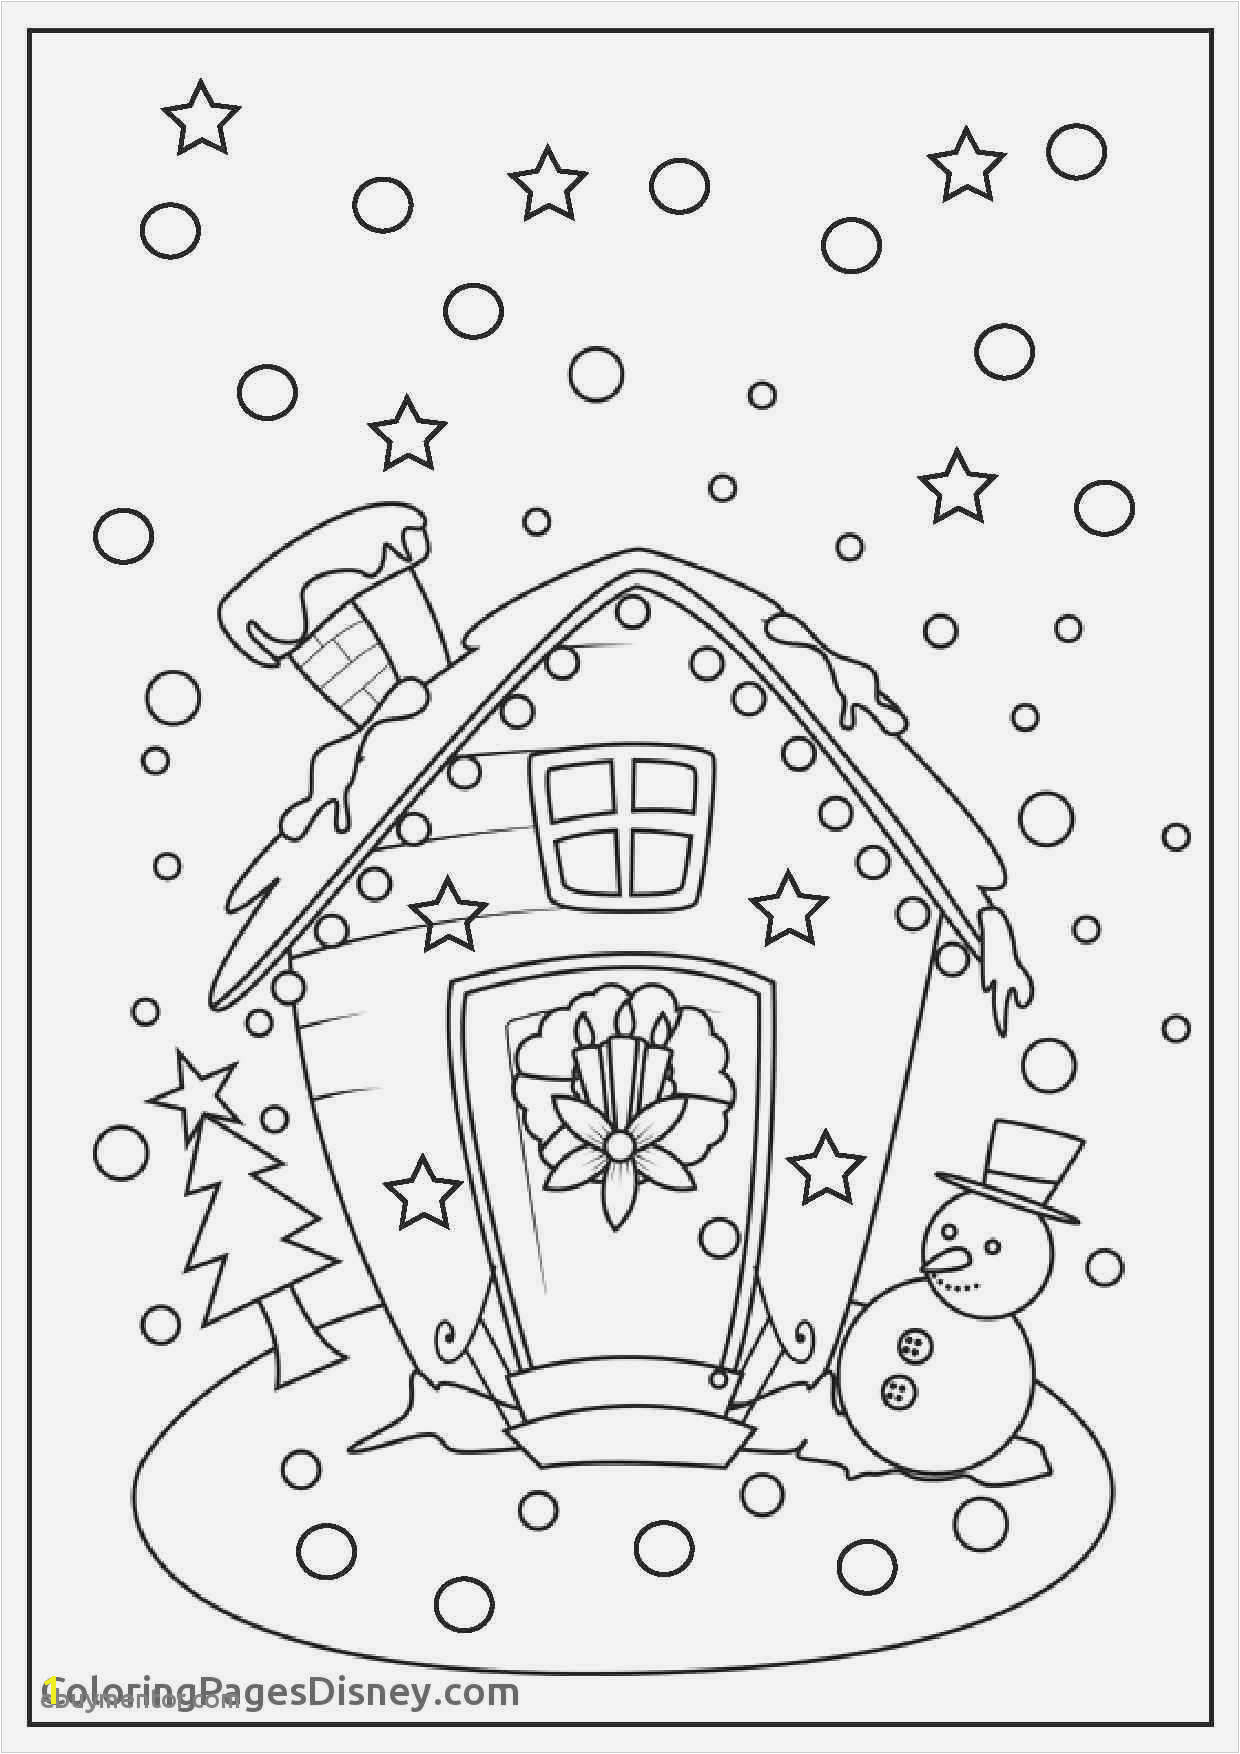 Coloring Pages Of Anything Free Christmas Coloring Pages for Kids Cool Coloring Printables 0d